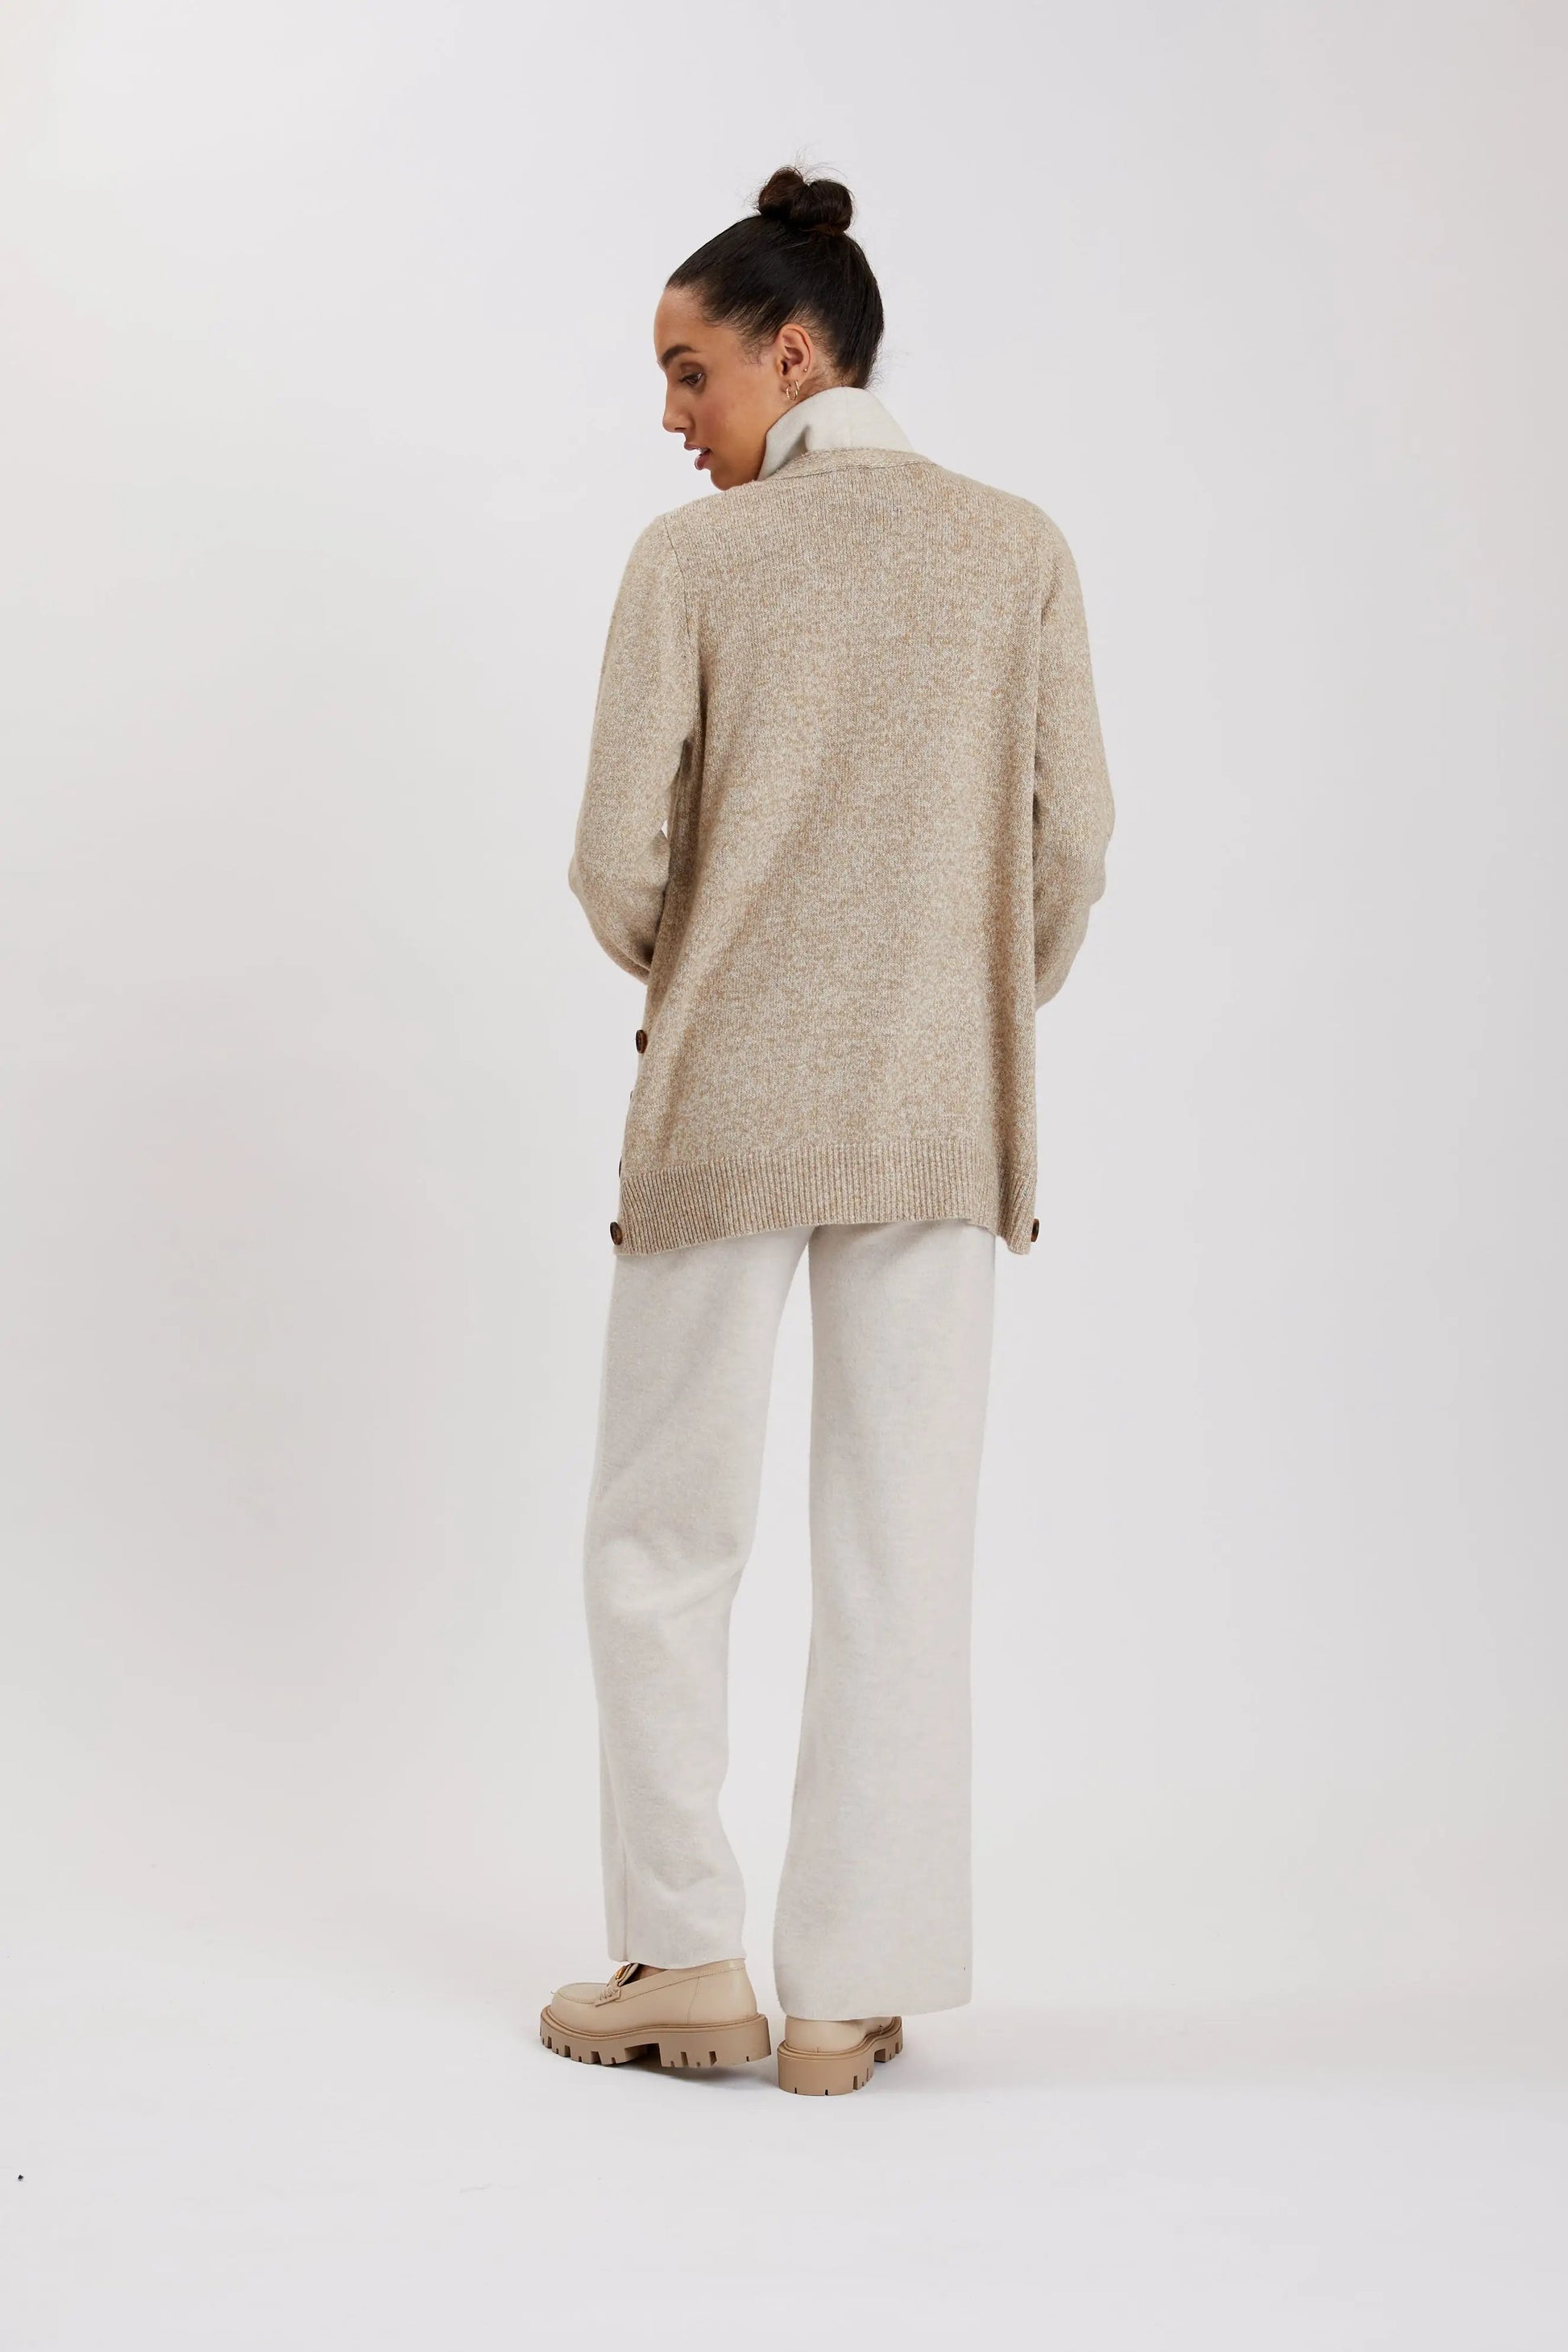 A woman wearing a Point Zero MOL9199 cardigan in beige, featuring side buttons and made from soft fabric, seen from the back.